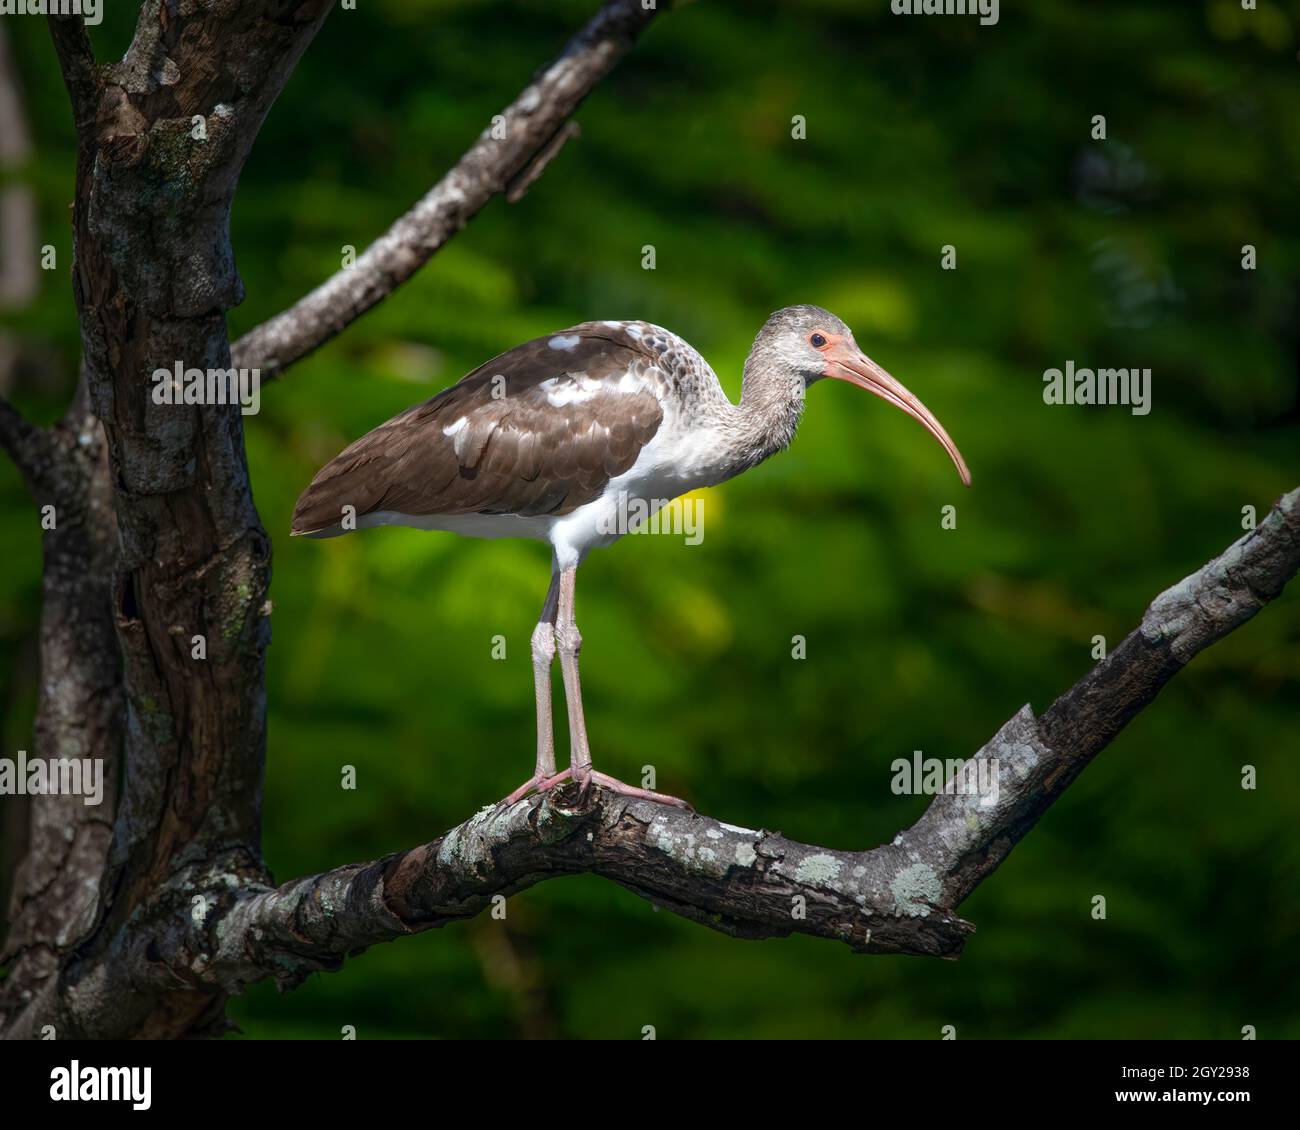 A juvenile White Ibis perches in a tree in the Florida Everglades. The juvenile has patches of brown and white before turning all white at adulthood. Stock Photo